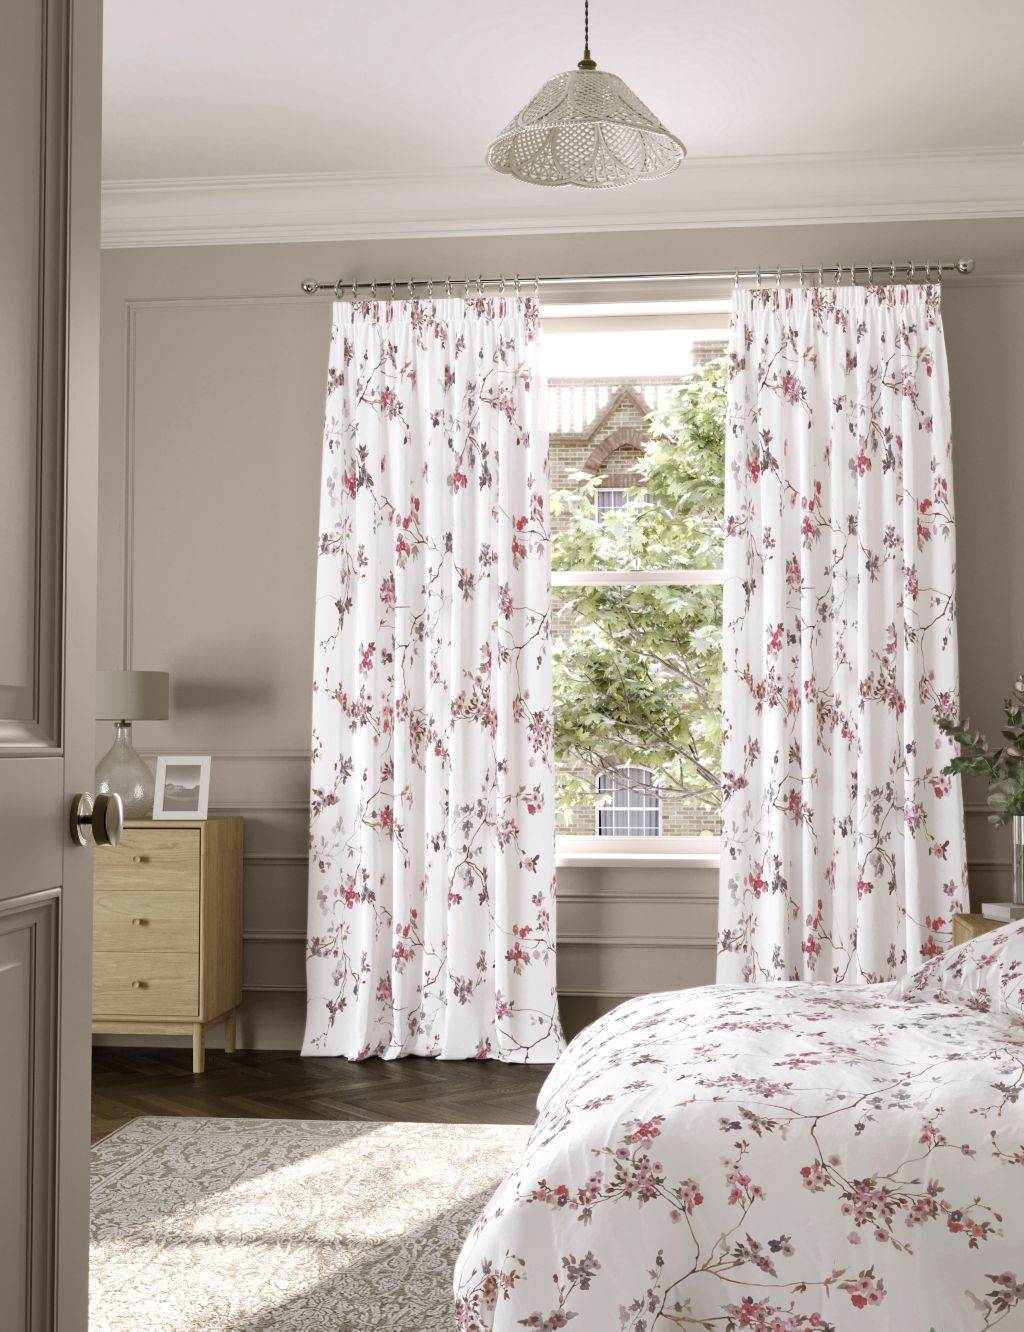 Sateen Cherry Blossom Pencil Pleat Blackout Curtains image 3